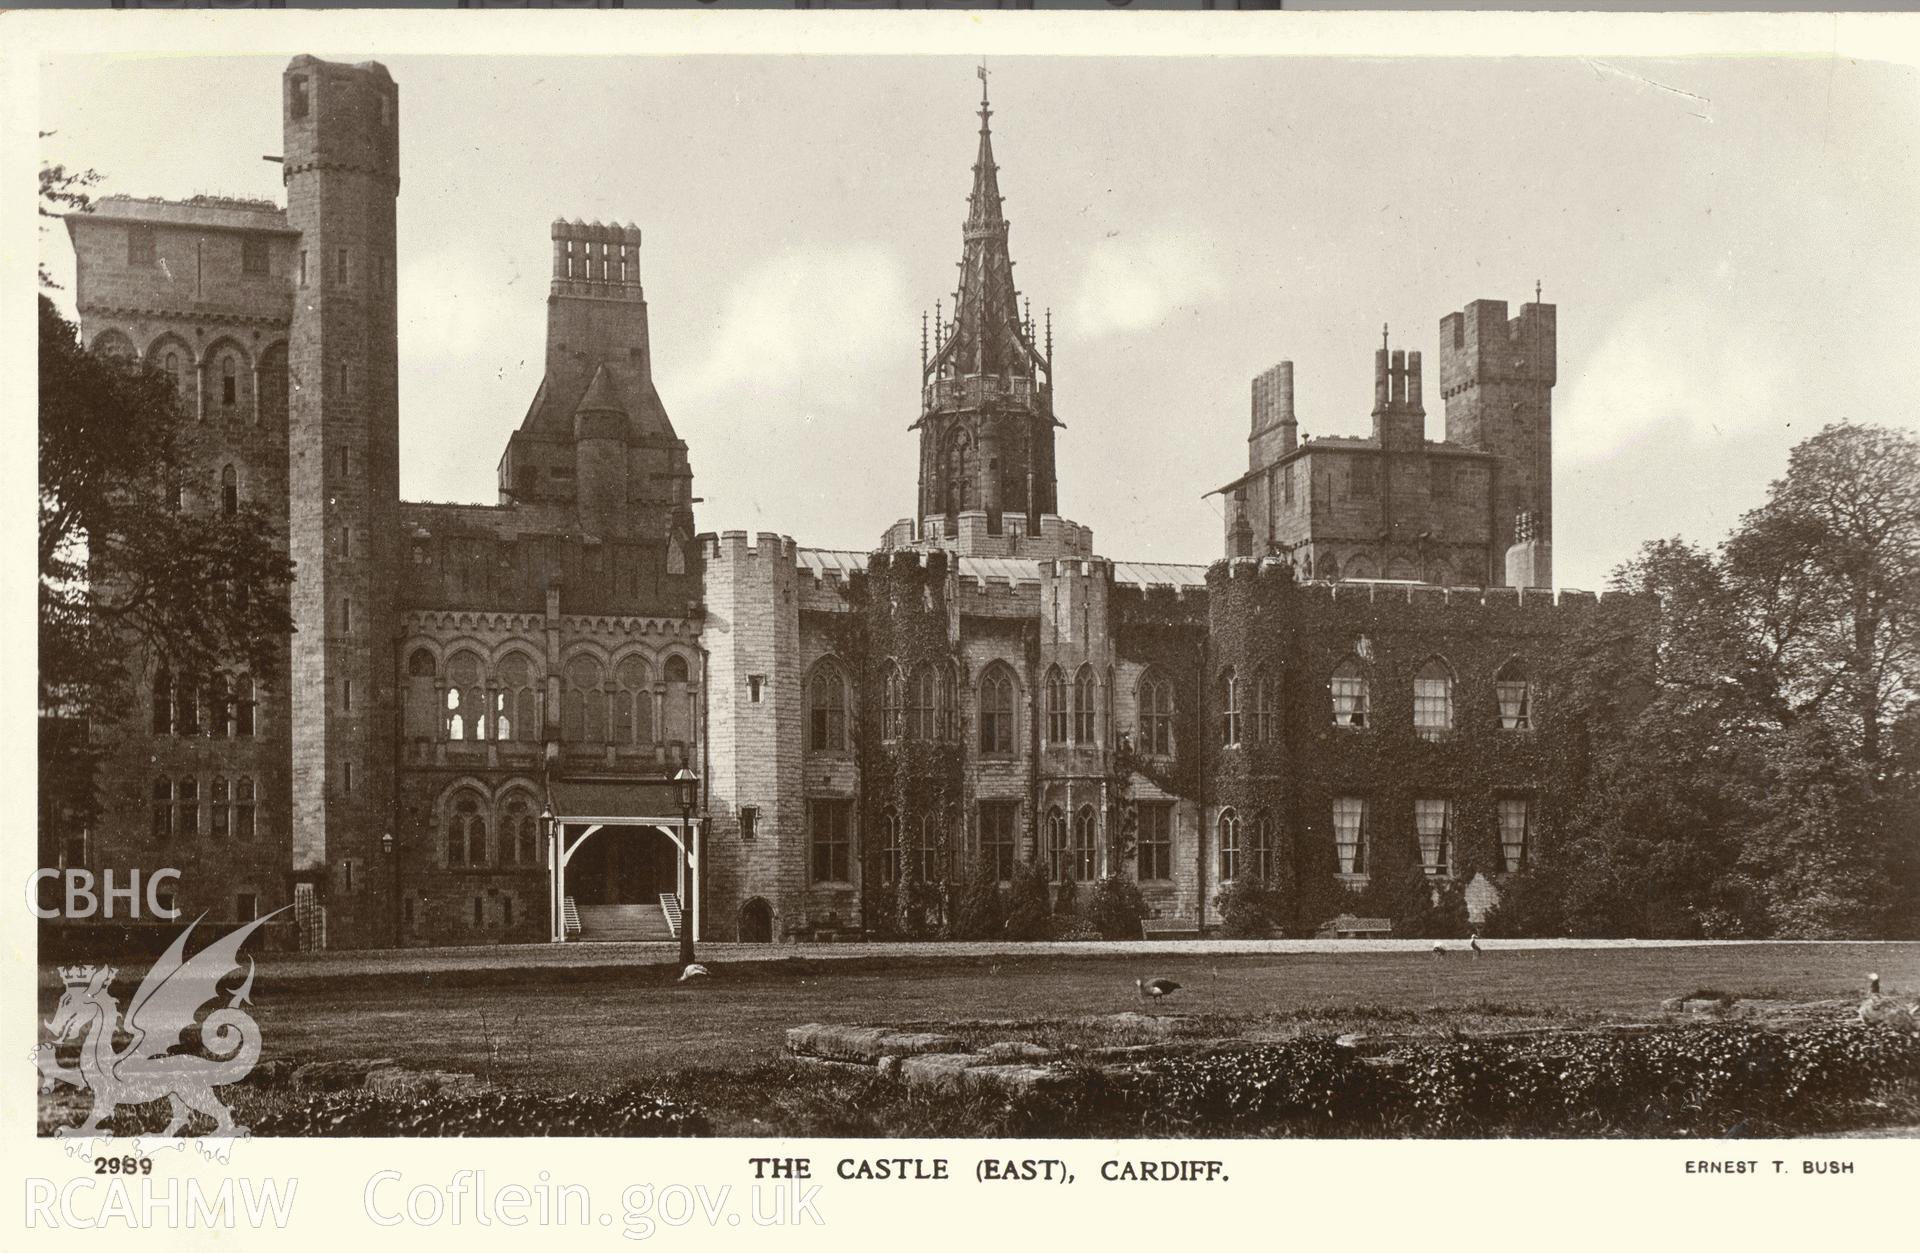 Digitised postcard image of Cardiff Castle from the east, The Royal Photographic Company, London. Produced by Parks and Gardens Data Services, from an original item in the Peter Davis Collection at Parks and Gardens UK. We hold only web-resolution images of this collection, suitable for viewing on screen and for research purposes only. We do not hold the original images, or publication quality scans.